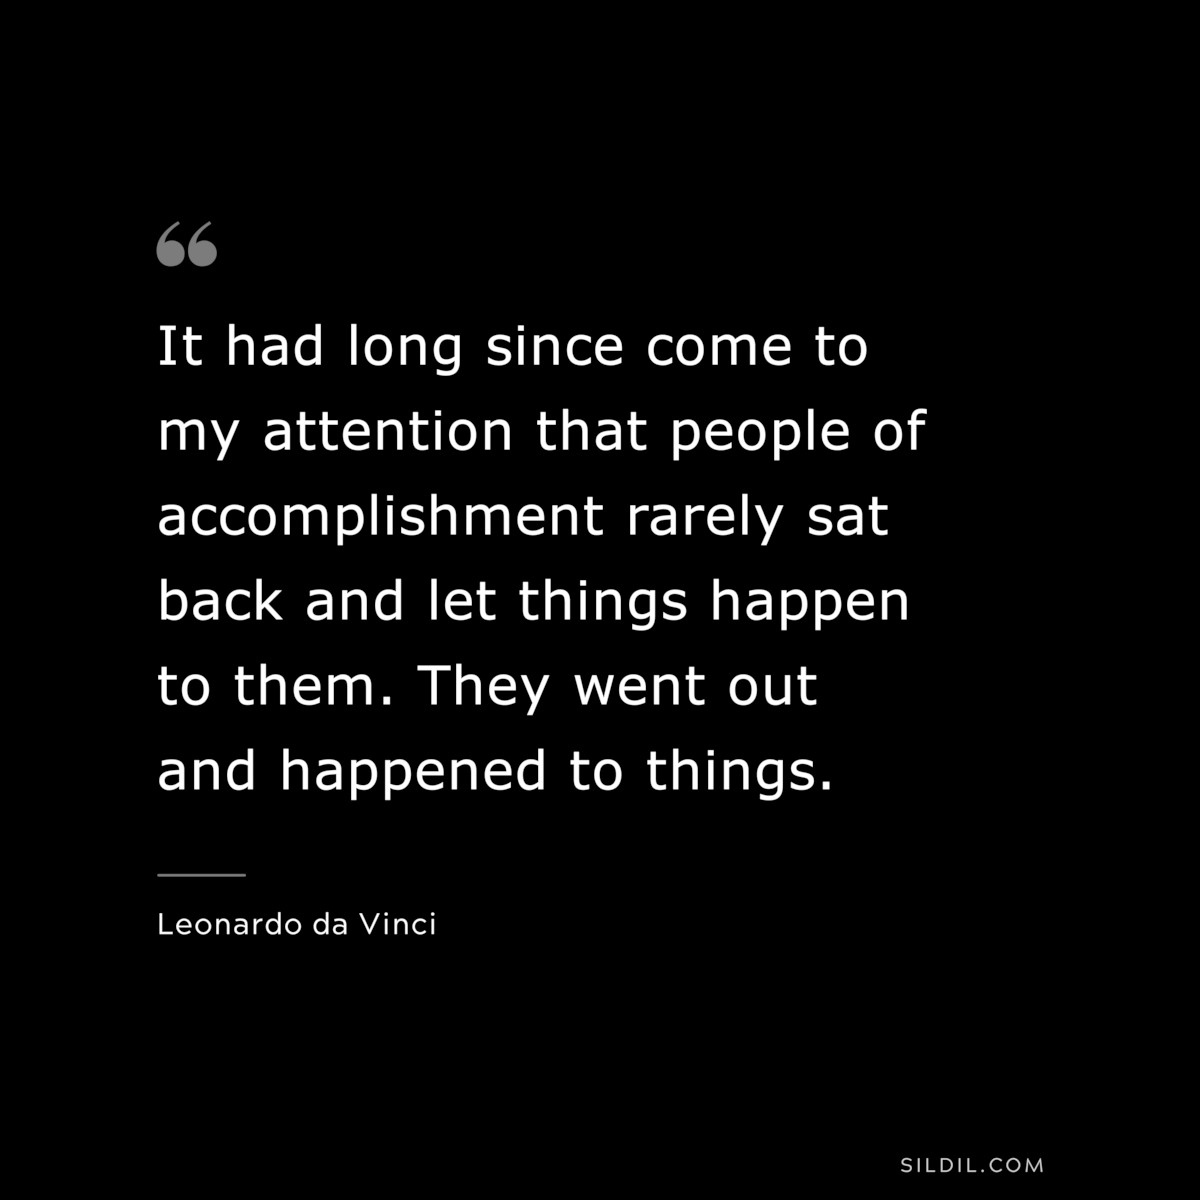 It had long since come to my attention that people of accomplishment rarely sat back and let things happen to them. They went out and happened to things. ― Leonardo da Vinci